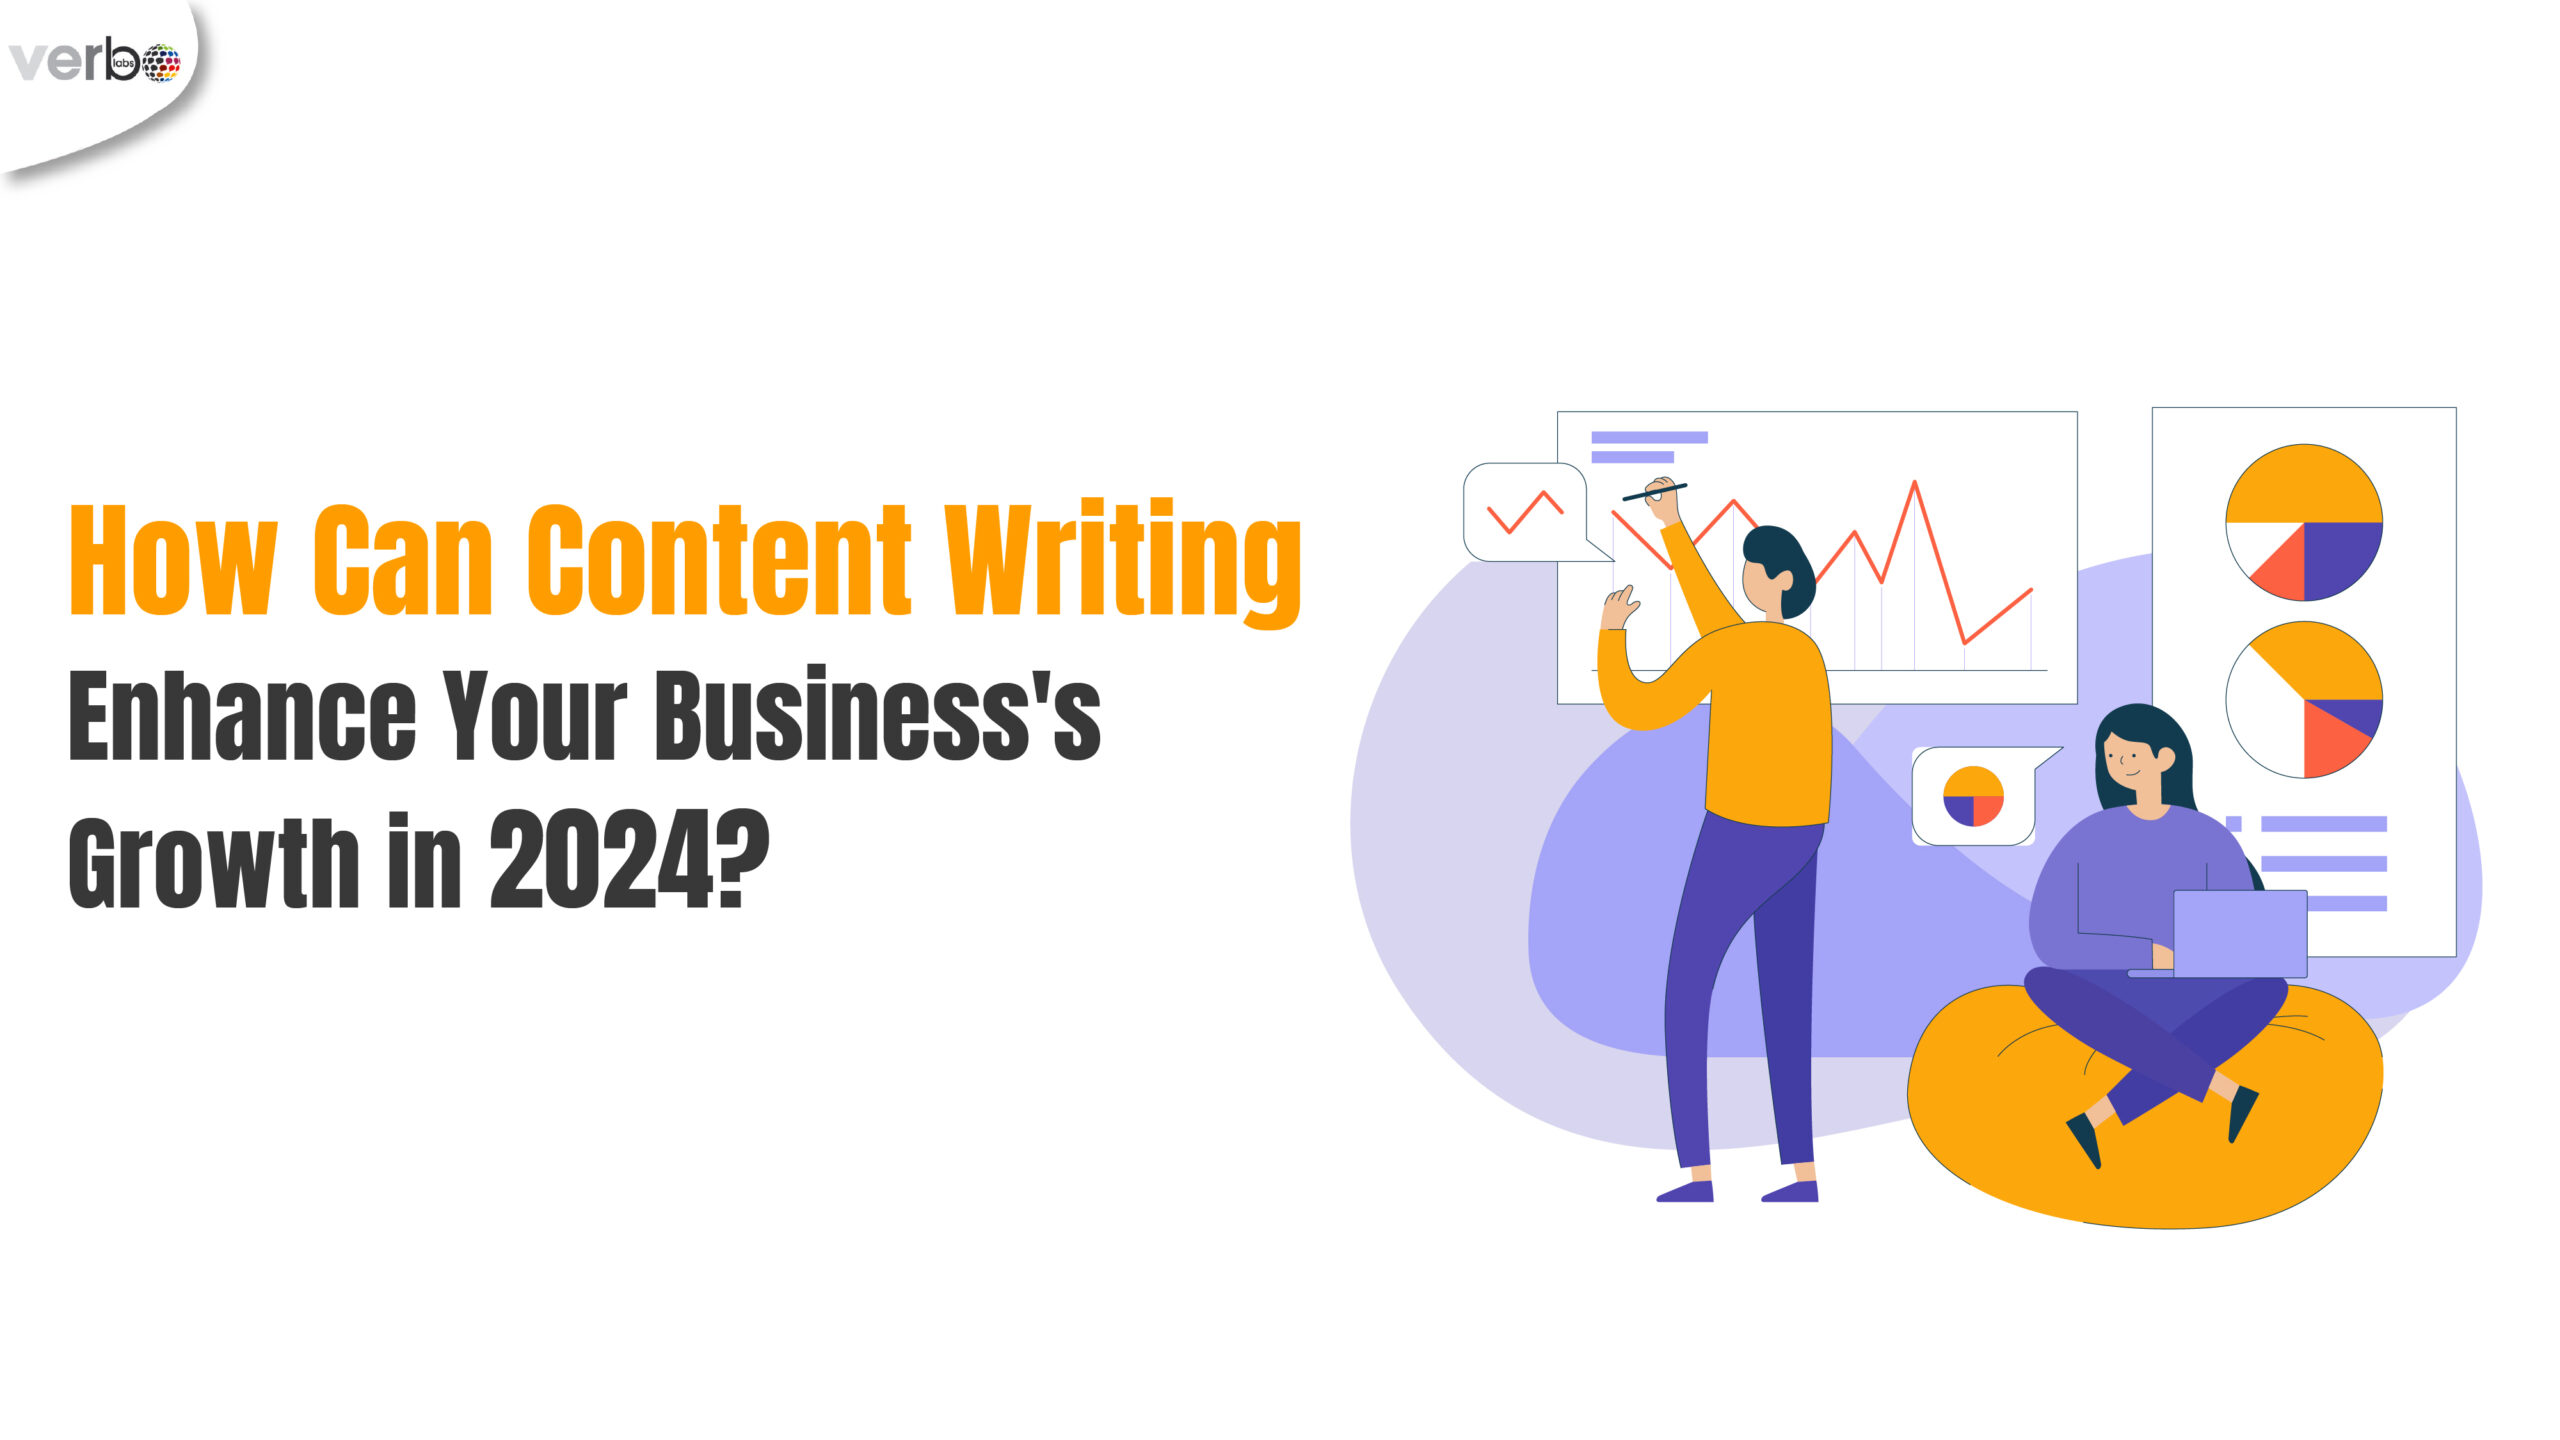 How can content writing enhance your business growth in 2024